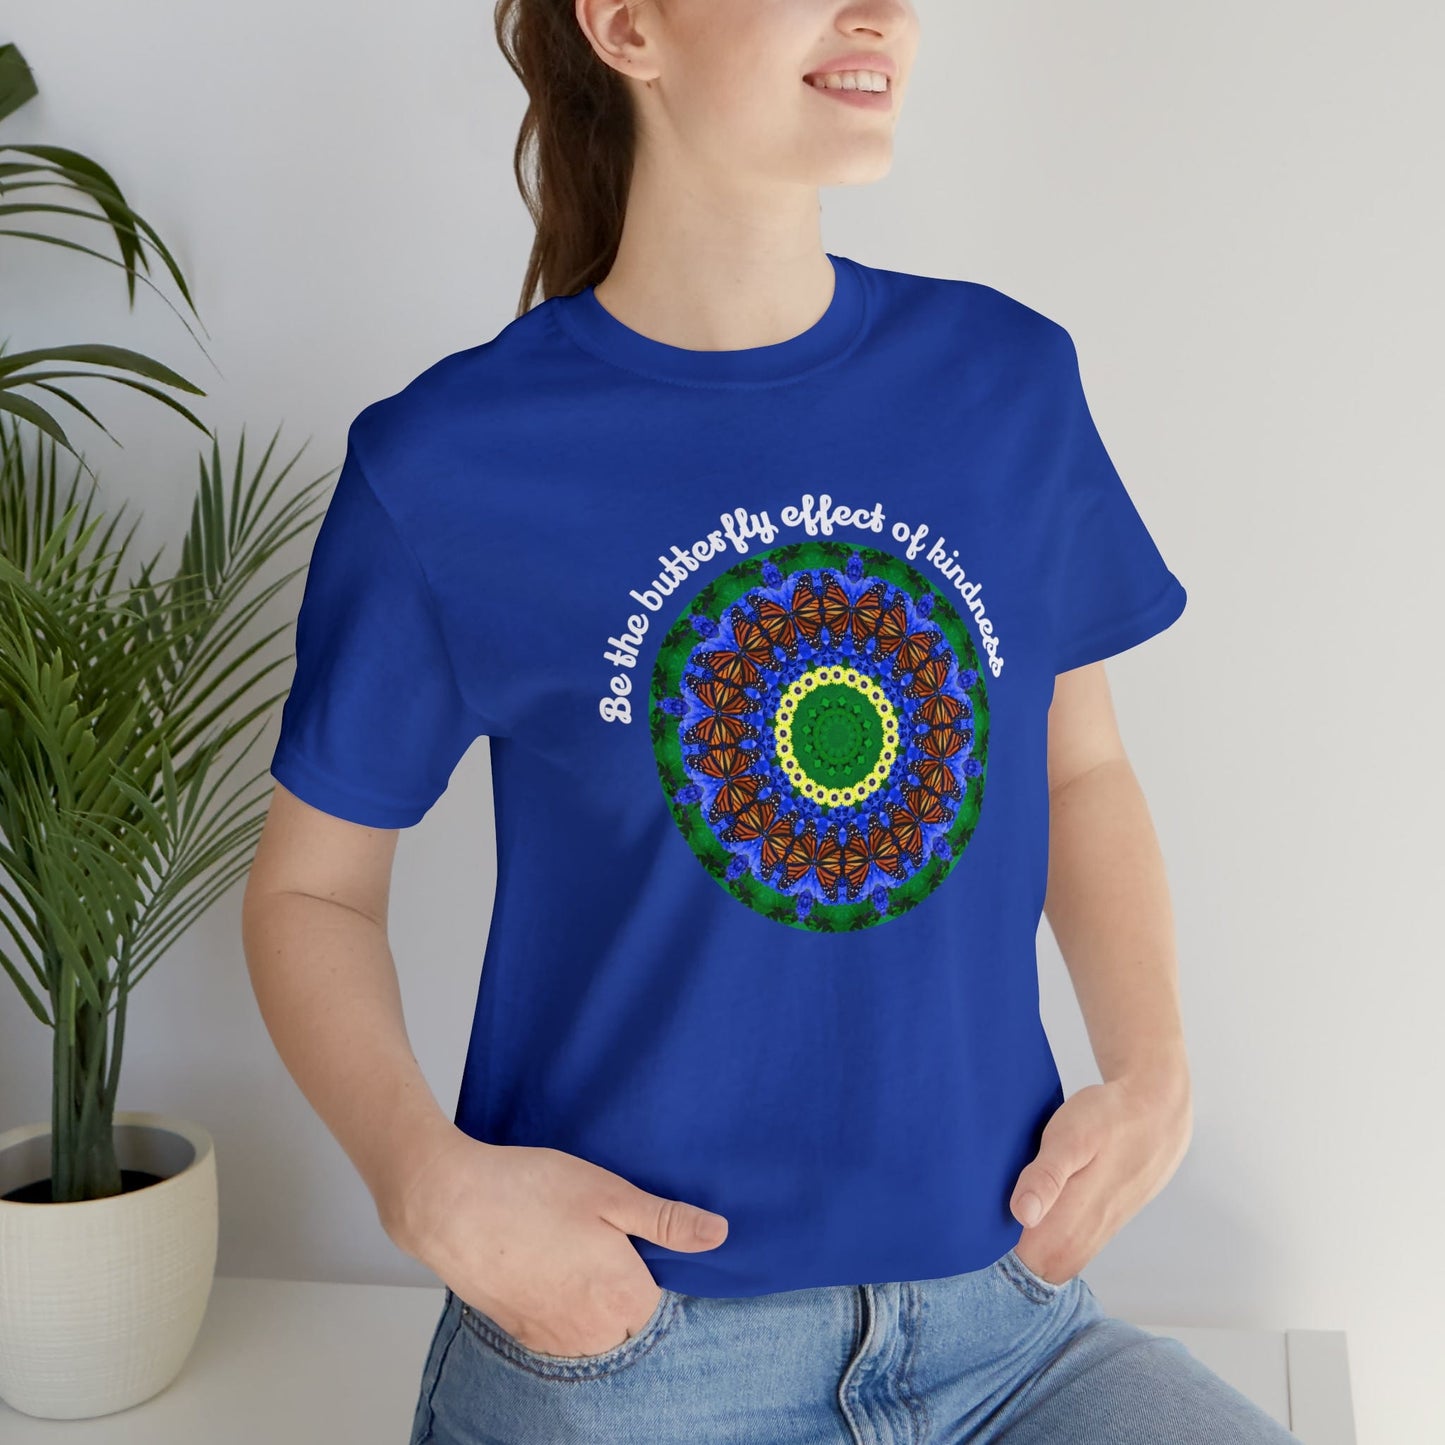 Cute Graphic Kindness Shirts  - Beautiful Monarch Butterfly Mandala Art For Positive Vibes – Butterfly Effect True Royal Blue